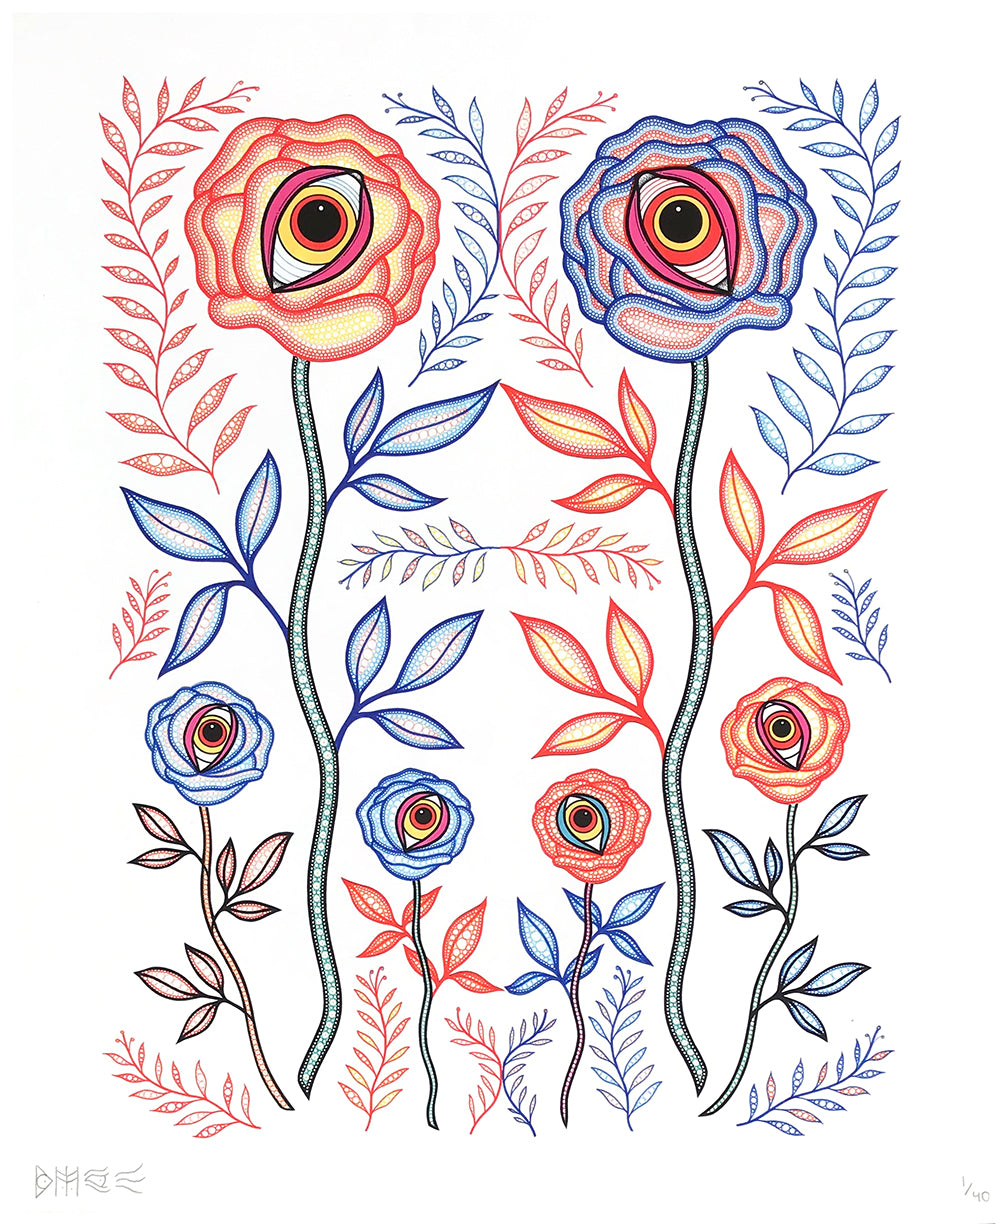 Bonethrower - &quot;Eye Roses&quot; - Archival Print, Limited Edition of 40 - 14 x 17&quot;